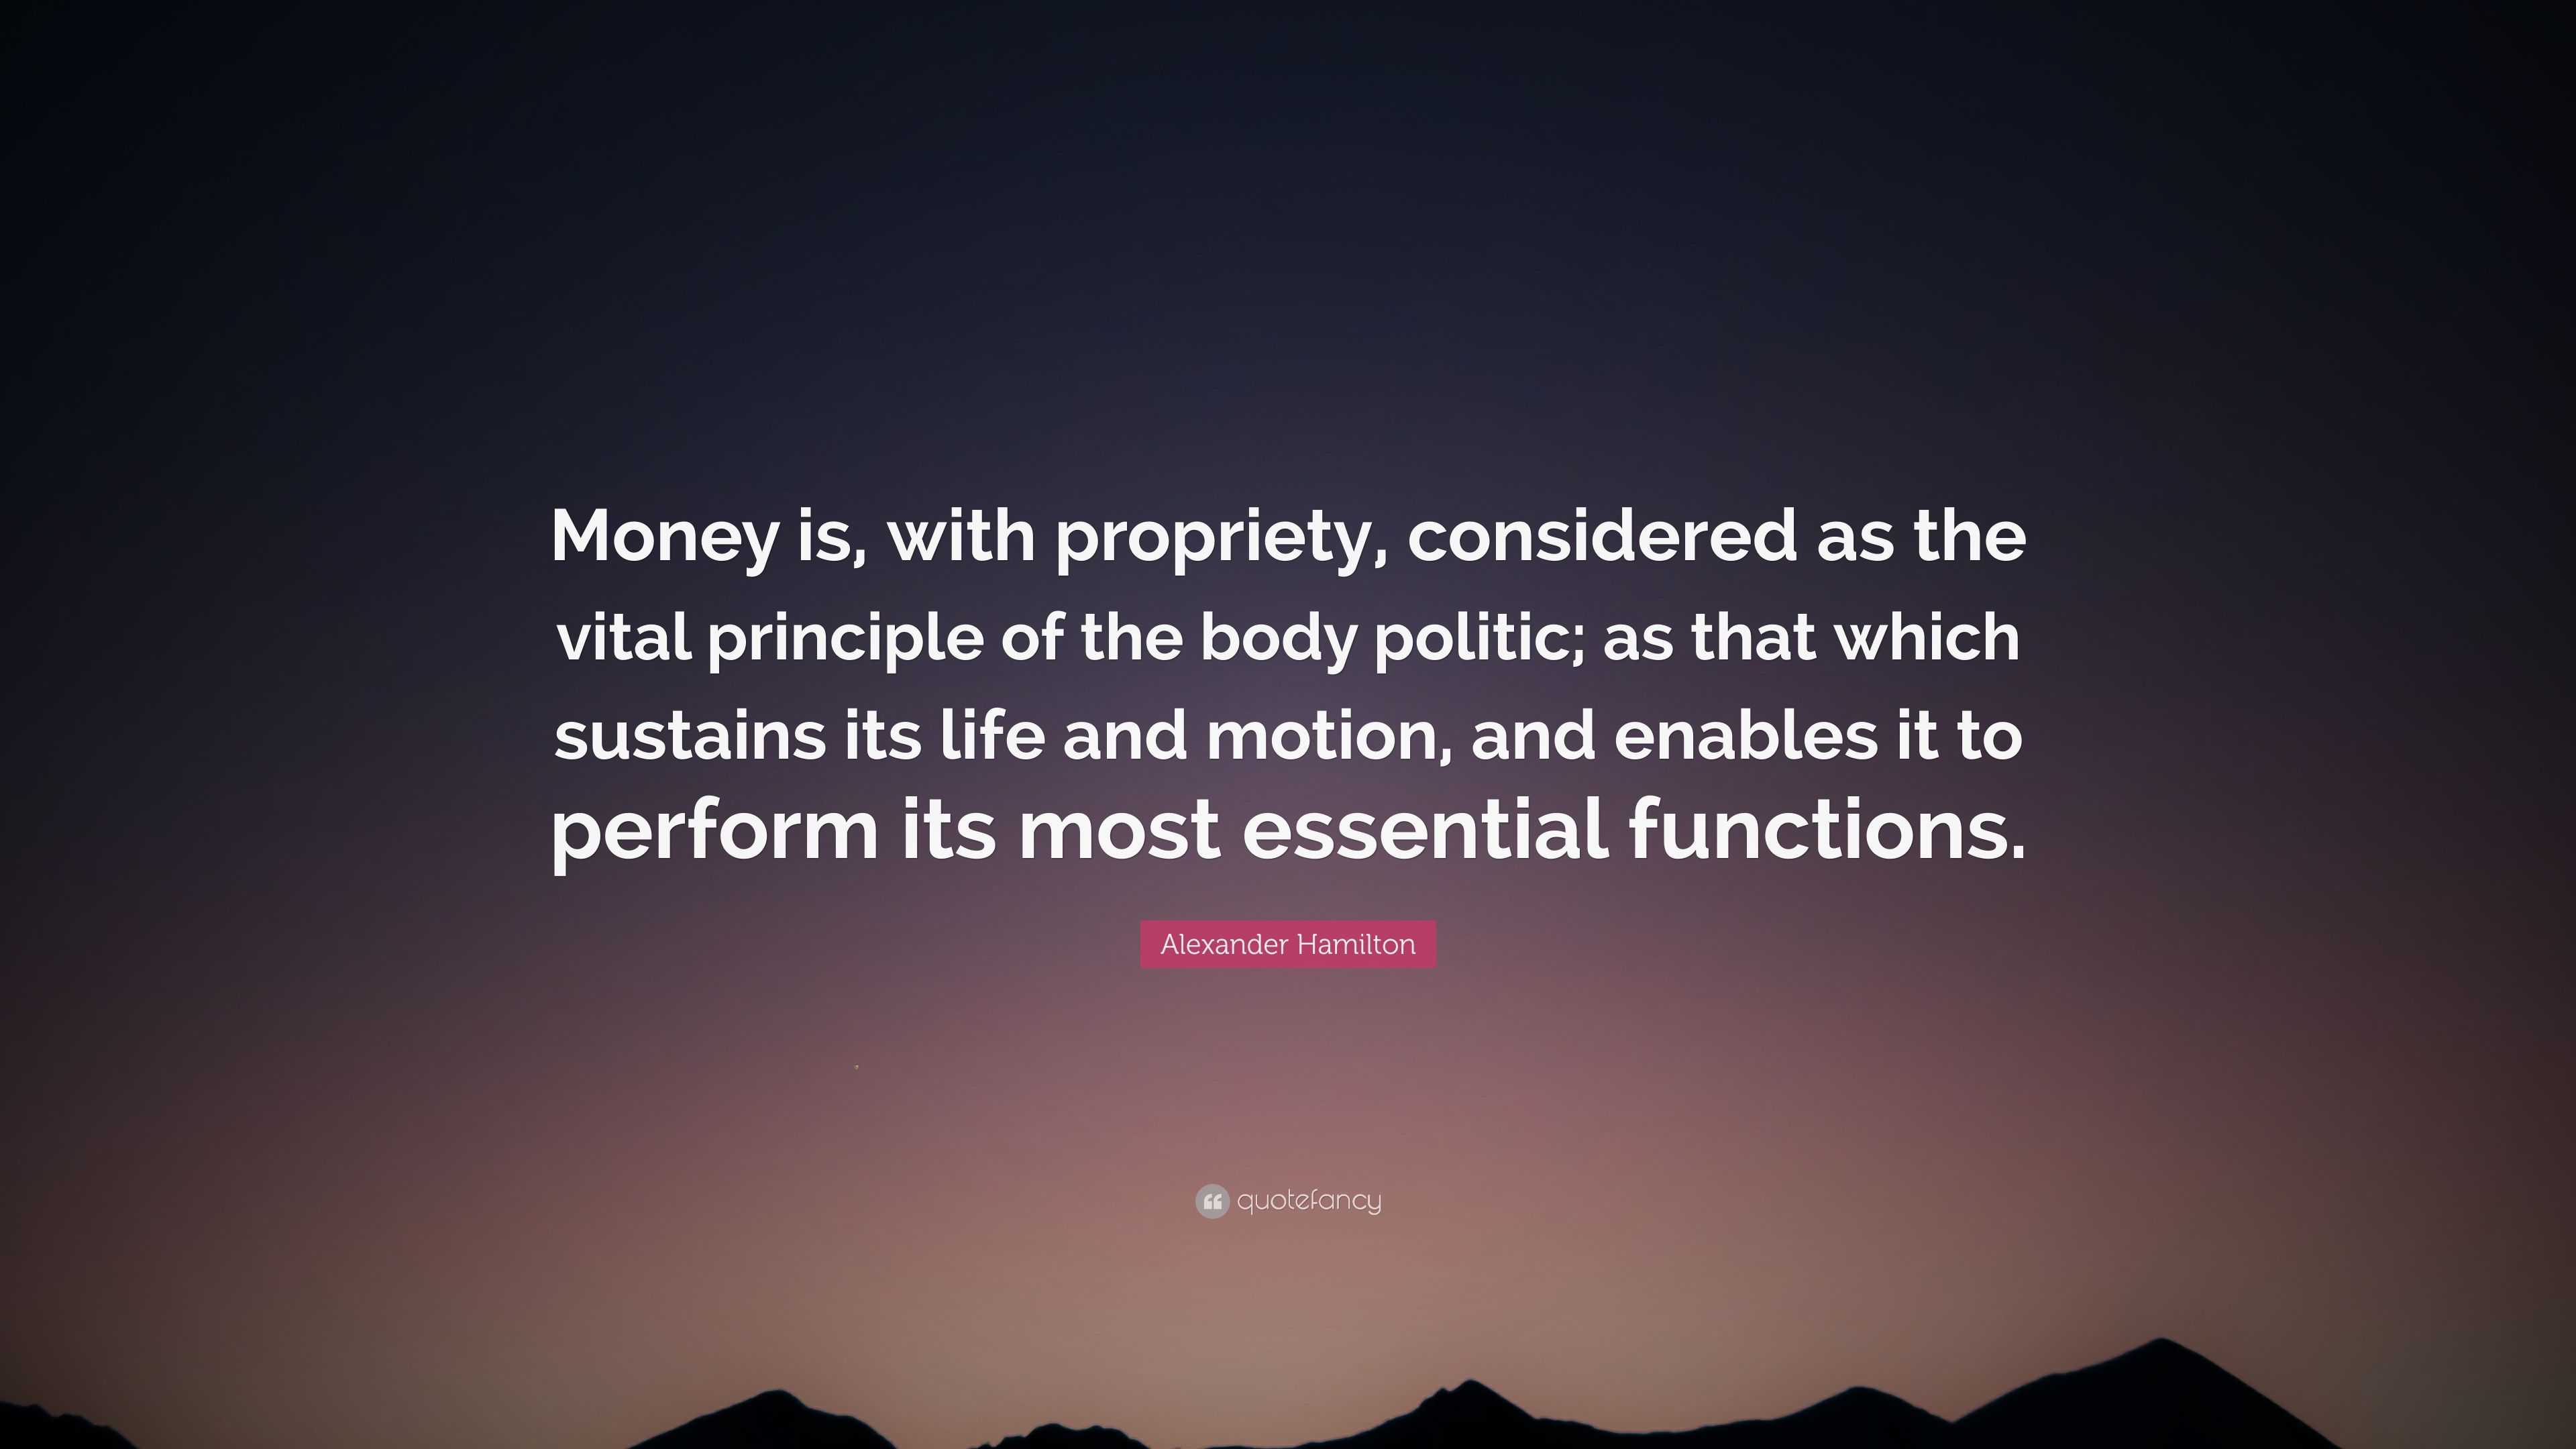 Alexander Hamilton Quote: “Money is, with propriety, considered as the ...